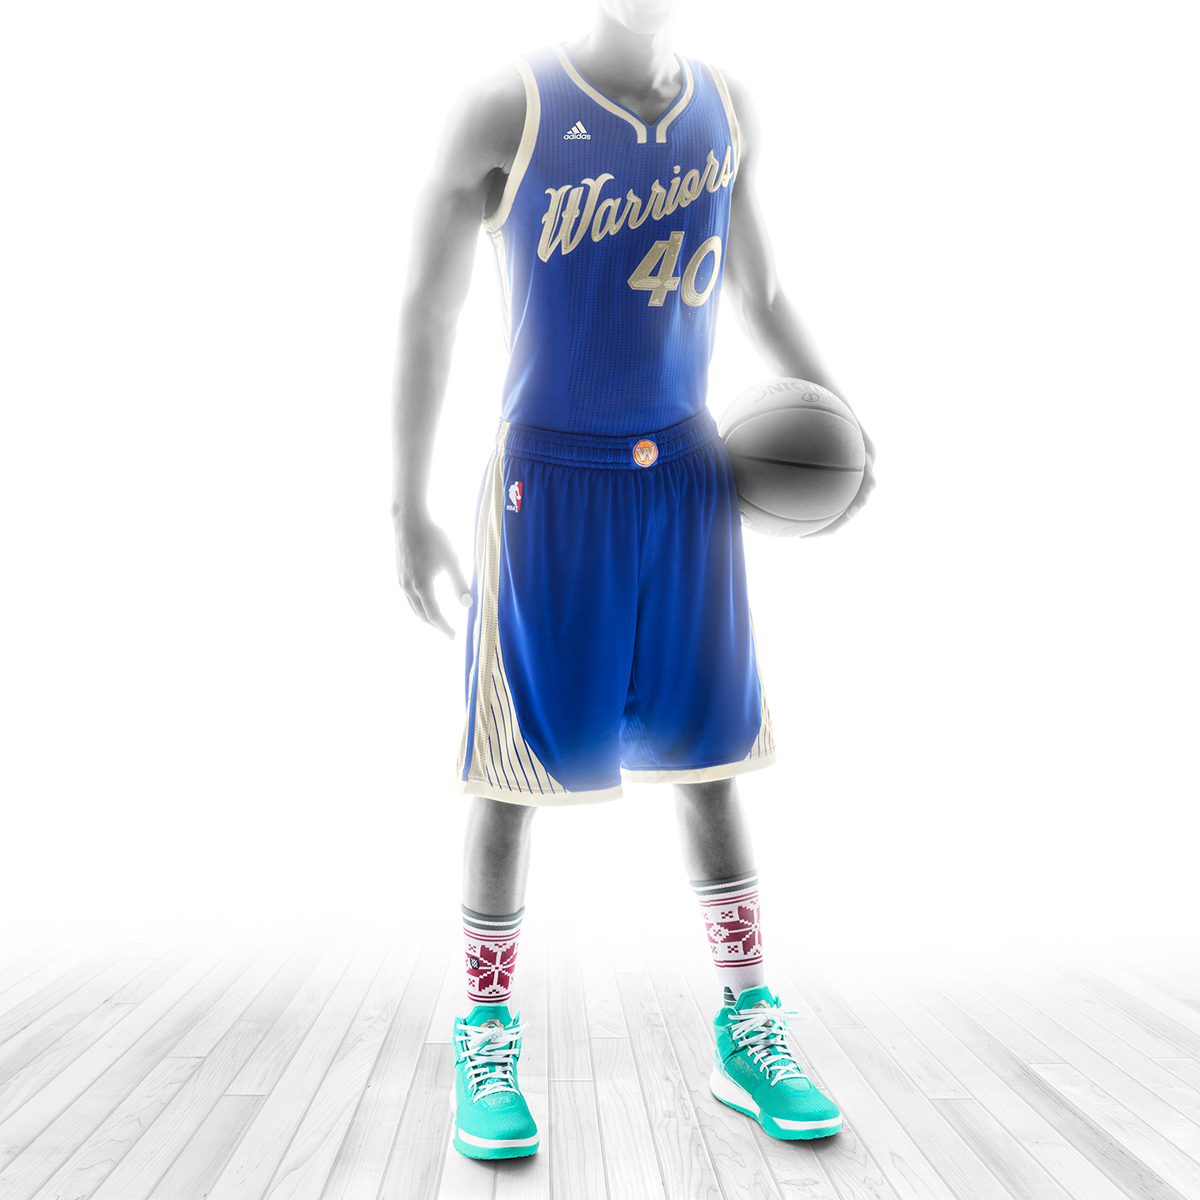 adidas Shows Off Christmas 2015 NBA Uniforms and Footwear